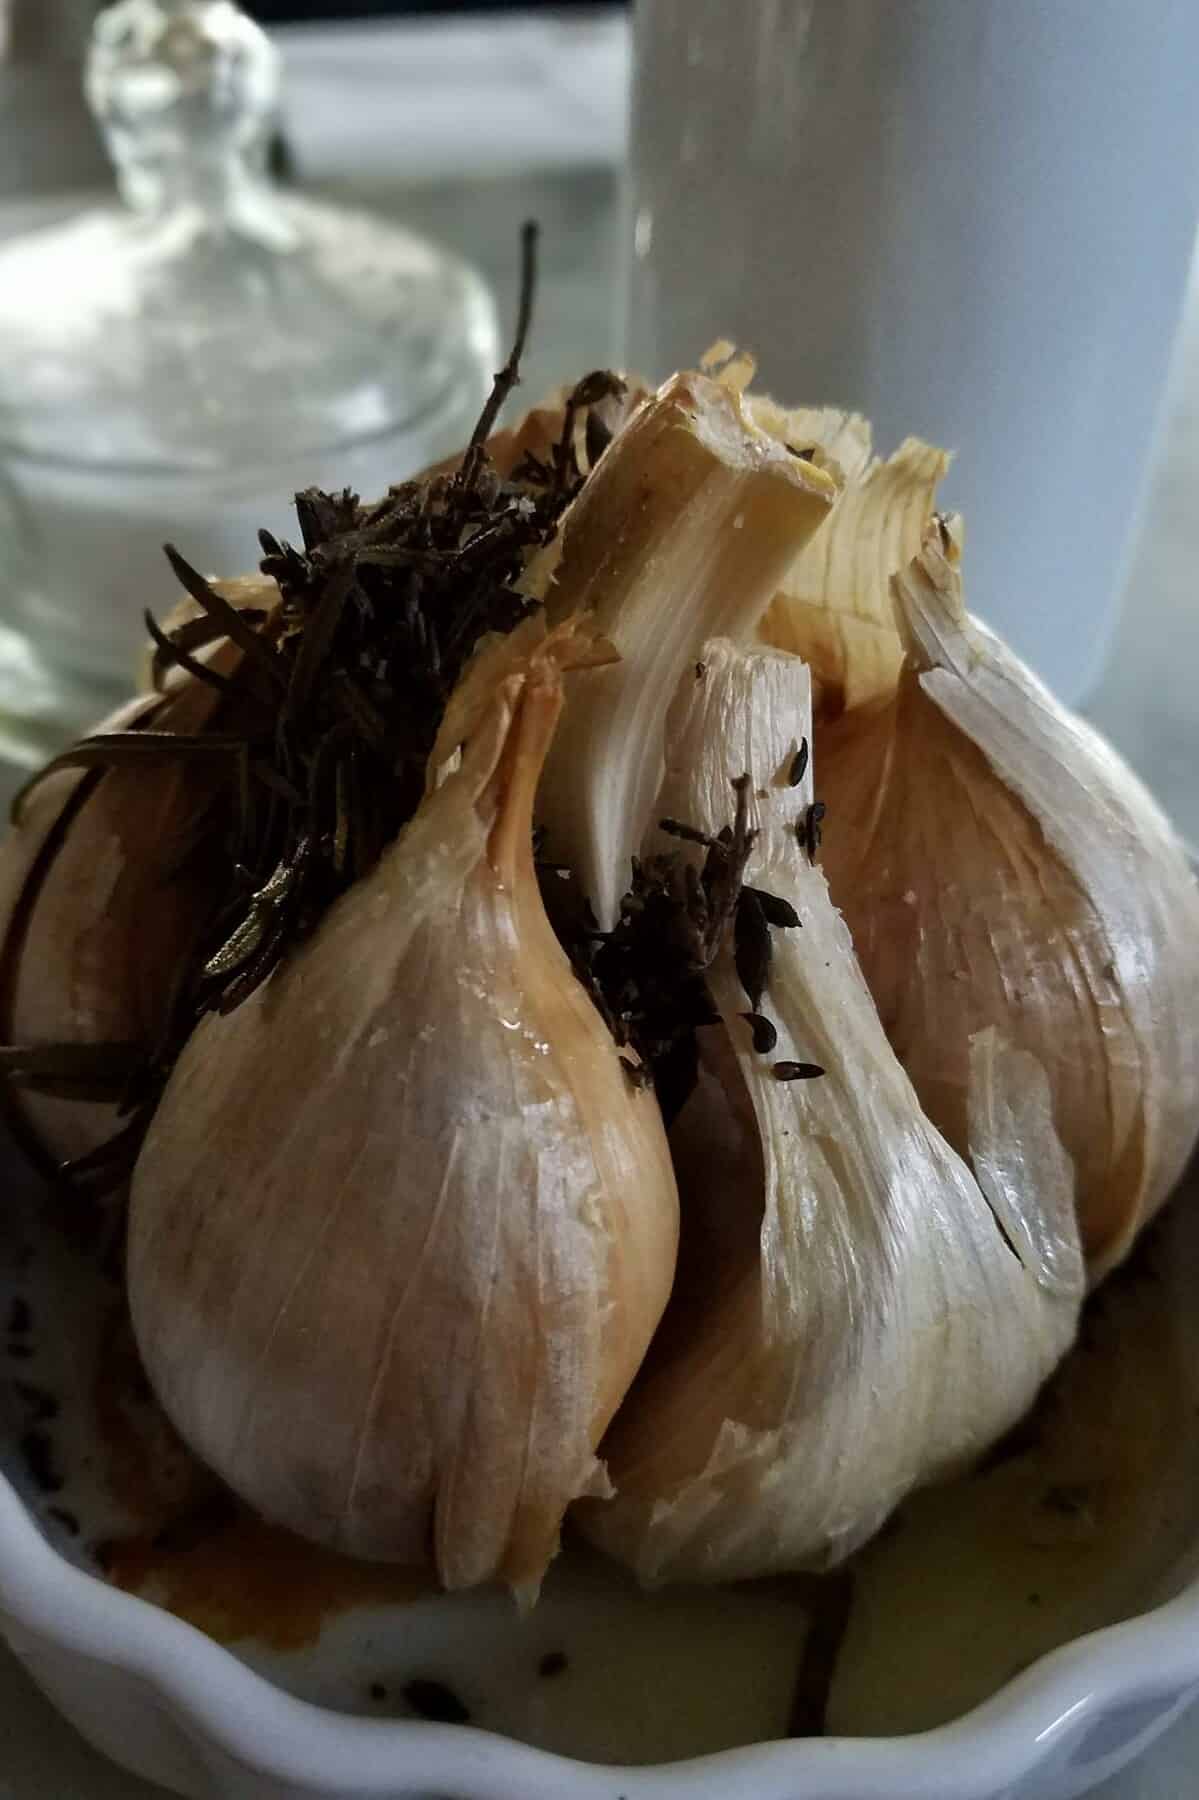  Whole elephant garlic bulbs sitting atop the hot grill grates.